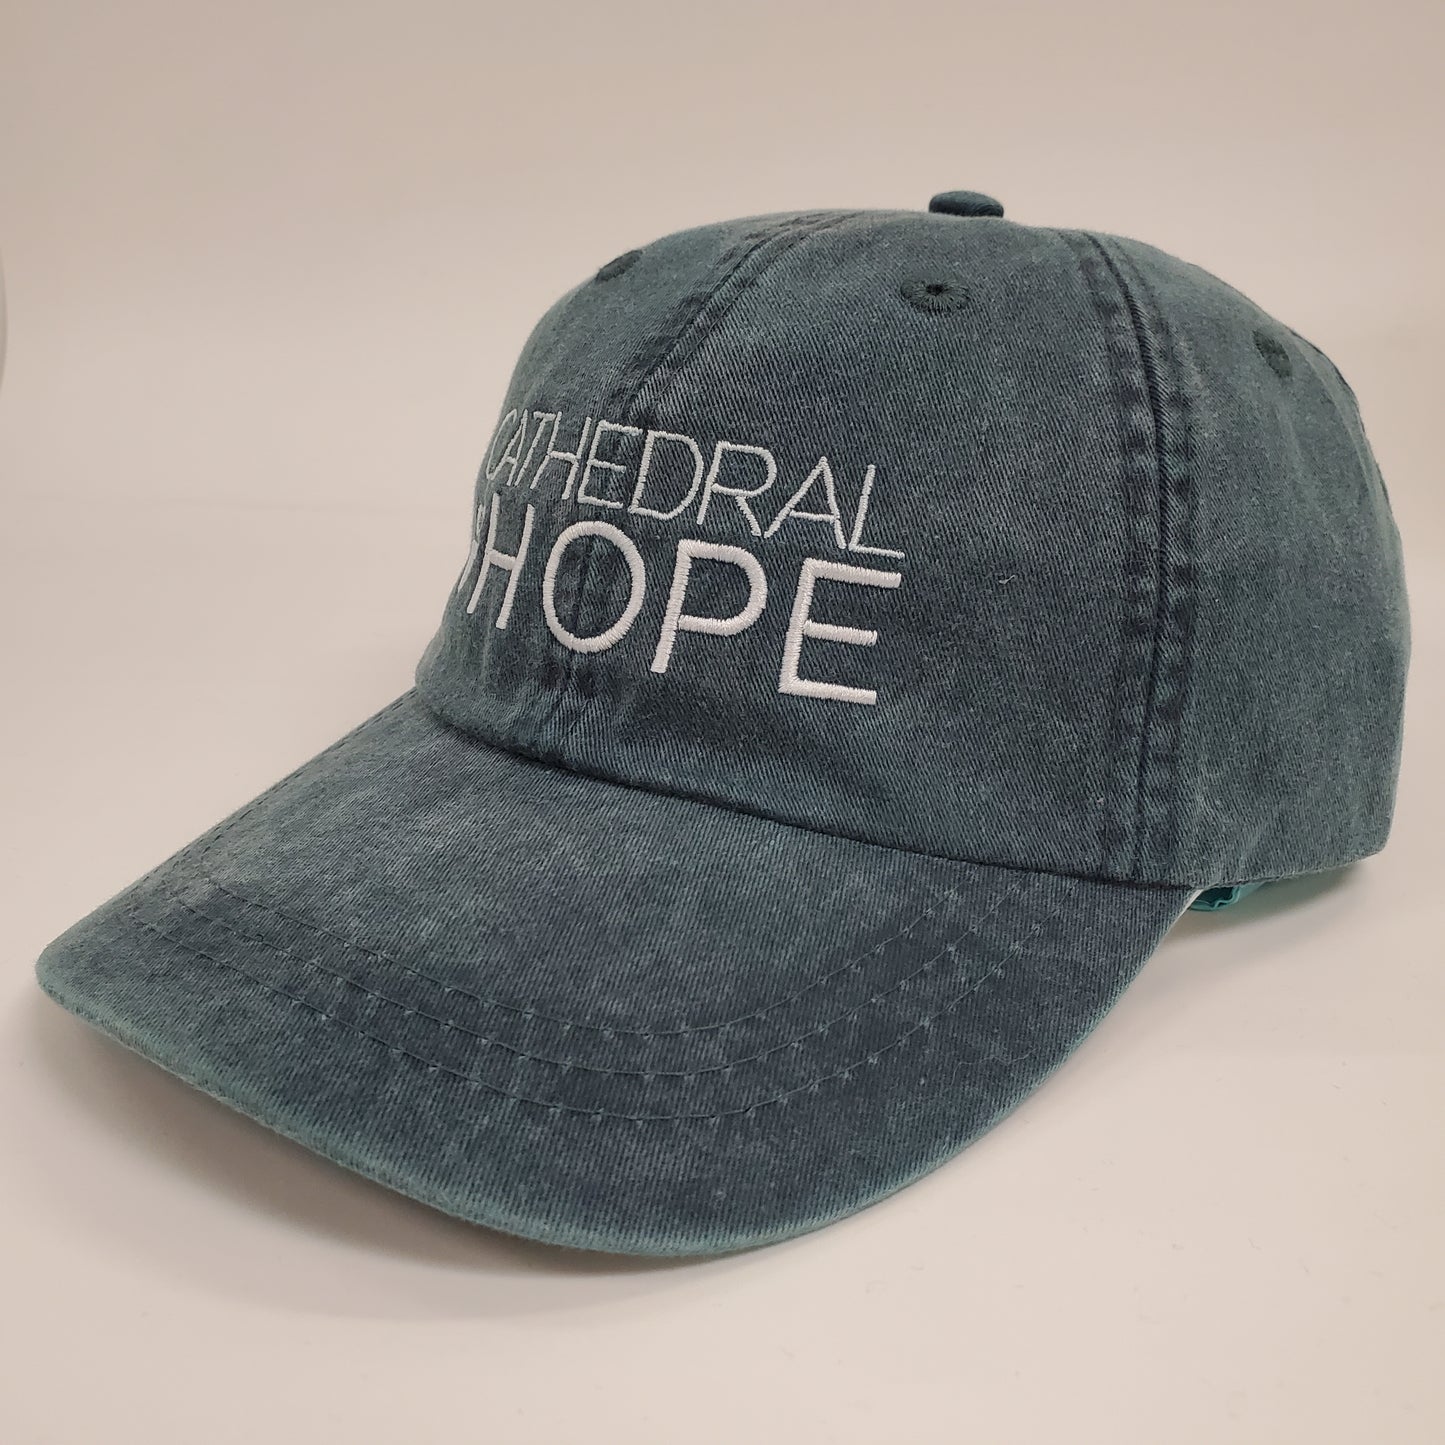 Cathedral of Hope Ball Cap